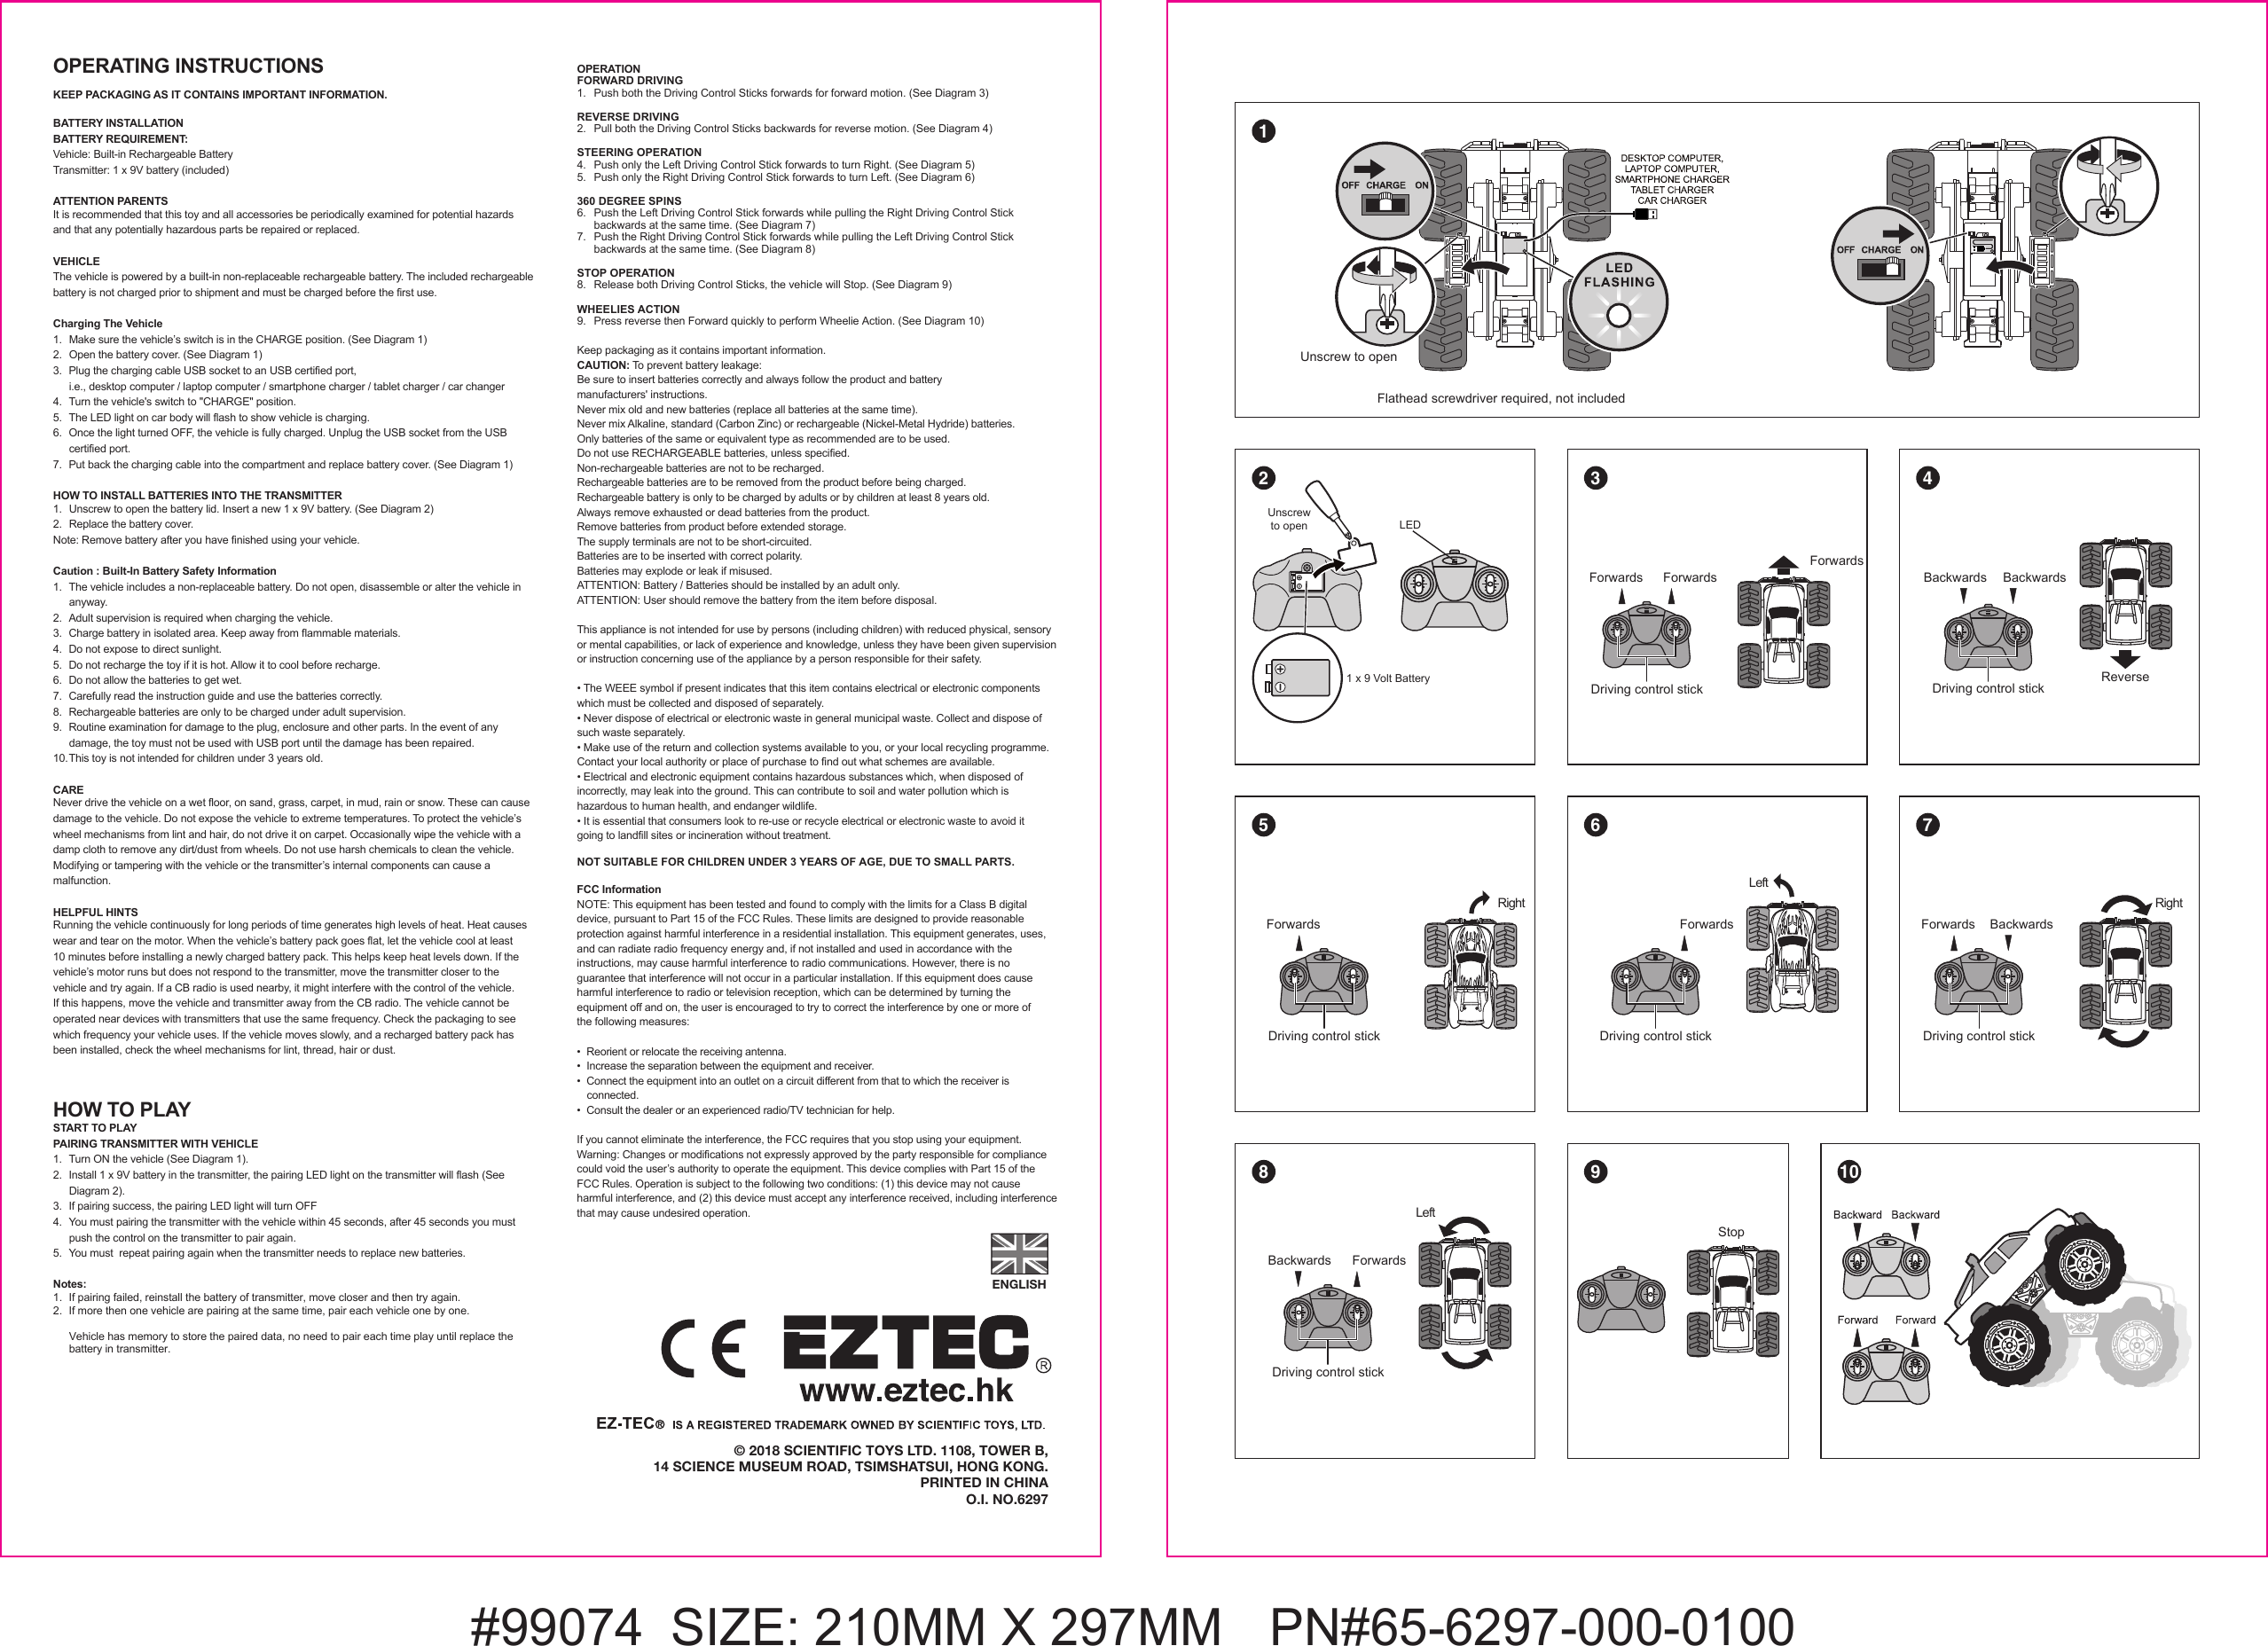 #99074  SIZE: 210MM X 297MM   PN#65-6297-000-0100© 2018 SCIENTIFIC TOYS LTD. 1108, TOWER B,14 SCIENCE MUSEUM ROAD, TSIMSHATSUI, HONG KONG.PRINTED IN CHINAO.I. NO.6297ENGLISHFlathead screwdriver required, not included1 21 x 9 Volt BatteryUnscrewto open3Driving control stickForwards ForwardsForwards5Driving control stickBackwards BackwardsReverse4108 96 7LeftRightDriving control stickForwardsDriving control stickForwardsBackwardsBackwardsStopUnscrew to openOPERATING INSTRUCTIONS KEEP PACKAGING AS IT CONTAINS IMPORTANT INFORMATION.BATTERY INSTALLATIONBATTERY REQUIREMENT:Vehicle: Built-in Rechargeable BatteryTransmitter: 1 x 9V battery (included)ATTENTION PARENTSIt is recommended that this toy and all accessories be periodically examined for potential hazards and that any potentially hazardous parts be repaired or replaced.VEHICLEThe vehicle is powered by a built-in non-replaceable rechargeable battery. The included rechargeable battery is not charged prior to shipment and must be charged before the first use.Charging The Vehicle1.   Make sure the vehicle’s switch is in the CHARGE position. (See Diagram 1)2.   Open the battery cover. (See Diagram 1)3.  Plug the charging cable USB socket to an USB certified port,   i.e., desktop computer / laptop computer / smartphone charger / tablet charger / car changer4.  Turn the vehicle&apos;s switch to &quot;CHARGE&quot; position.5.  The LED light on car body will flash to show vehicle is charging.6.  Once the light turned OFF, the vehicle is fully charged. Unplug the USB socket from the USB   certified port.7.  Put back the charging cable into the compartment and replace battery cover. (See Diagram 1)HOW TO INSTALL BATTERIES INTO THE TRANSMITTER1.   Unscrew to open the battery lid. Insert a new 1 x 9V battery. (See Diagram 2)2.   Replace the battery cover.Note: Remove battery after you have finished using your vehicle.Caution : Built-In Battery Safety Information 1.  The vehicle includes a non-replaceable battery. Do not open, disassemble or alter the vehicle in  anyway.2.  Adult supervision is required when charging the vehicle.3.  Charge battery in isolated area. Keep away from flammable materials.4.  Do not expose to direct sunlight.5.  Do not recharge the toy if it is hot. Allow it to cool before recharge.6.  Do not allow the batteries to get wet.7.  Carefully read the instruction guide and use the batteries correctly.8.  Rechargeable batteries are only to be charged under adult supervision.9.  Routine examination for damage to the plug, enclosure and other parts. In the event of any   damage, the toy must not be used with USB port until the damage has been repaired.10. This toy is not intended for children under 3 years old.CARENever drive the vehicle on a wet floor, on sand, grass, carpet, in mud, rain or snow. These can cause damage to the vehicle. Do not expose the vehicle to extreme temperatures. To protect the vehicle’s wheel mechanisms from lint and hair, do not drive it on carpet. Occasionally wipe the vehicle with a damp cloth to remove any dirt/dust from wheels. Do not use harsh chemicals to clean the vehicle. Modifying or tampering with the vehicle or the transmitter’s internal components can cause a malfunction. HELPFUL HINTSRunning the vehicle continuously for long periods of time generates high levels of heat. Heat causes wear and tear on the motor. When the vehicle’s battery pack goes flat, let the vehicle cool at least 10 minutes before installing a newly charged battery pack. This helps keep heat levels down. If the vehicle’s motor runs but does not respond to the transmitter, move the transmitter closer to the vehicle and try again. If a CB radio is used nearby, it might interfere with the control of the vehicle. If this happens, move the vehicle and transmitter away from the CB radio. The vehicle cannot be operated near devices with transmitters that use the same frequency. Check the packaging to see which frequency your vehicle uses. If the vehicle moves slowly, and a recharged battery pack has been installed, check the wheel mechanisms for lint, thread, hair or dust.HOW TO PLAYSTART TO PLAYPAIRING TRANSMITTER WITH VEHICLE1.  Turn ON the vehicle (See Diagram 1).2.  Install 1 x 9V battery in the transmitter, the pairing LED light on the transmitter will flash (See   Diagram 2).3.  If pairing success, the pairing LED light will turn OFF4.  You must pairing the transmitter with the vehicle within 45 seconds, after 45 seconds you must   push the control on the transmitter to pair again.5.  You must  repeat pairing again when the transmitter needs to replace new batteries.Notes:1.  If pairing failed, reinstall the battery of transmitter, move closer and then try again.2.  If more then one vehicle are pairing at the same time, pair each vehicle one by one.   Vehicle has memory to store the paired data, no need to pair each time play until replace the  battery in transmitter.OPERATIONFORWARD DRIVING1.  Push both the Driving Control Sticks forwards for forward motion. (See Diagram 3)REVERSE DRIVING2.  Pull both the Driving Control Sticks backwards for reverse motion. (See Diagram 4)STEERING OPERATION4.  Push only the Left Driving Control Stick forwards to turn Right. (See Diagram 5)5.  Push only the Right Driving Control Stick forwards to turn Left. (See Diagram 6)360 DEGREE SPINS6.  Push the Left Driving Control Stick forwards while pulling the Right Driving Control Stick   backwards at the same time. (See Diagram 7)7.  Push the Right Driving Control Stick forwards while pulling the Left Driving Control Stick   backwards at the same time. (See Diagram 8)STOP OPERATION8.  Release both Driving Control Sticks, the vehicle will Stop. (See Diagram 9)WHEELIES ACTION9.  Press reverse then Forward quickly to perform Wheelie Action. (See Diagram 10)Keep packaging as it contains important information.CAUTION: To prevent battery leakage:Be sure to insert batteries correctly and always follow the product and battery manufacturers&apos; instructions.Never mix old and new batteries (replace all batteries at the same time).Never mix Alkaline, standard (Carbon Zinc) or rechargeable (Nickel-Metal Hydride) batteries.Only batteries of the same or equivalent type as recommended are to be used.Do not use RECHARGEABLE batteries, unless specified.Non-rechargeable batteries are not to be recharged.Rechargeable batteries are to be removed from the product before being charged. Rechargeable battery is only to be charged by adults or by children at least 8 years old.Always remove exhausted or dead batteries from the product.Remove batteries from product before extended storage.The supply terminals are not to be short-circuited.Batteries are to be inserted with correct polarity.Batteries may explode or leak if misused.ATTENTION: Battery / Batteries should be installed by an adult only.ATTENTION: User should remove the battery from the item before disposal.This appliance is not intended for use by persons (including children) with reduced physical, sensory or mental capabilities, or lack of experience and knowledge, unless they have been given supervision or instruction concerning use of the appliance by a person responsible for their safety.• The WEEE symbol if present indicates that this item contains electrical or electronic components which must be collected and disposed of separately.• Never dispose of electrical or electronic waste in general municipal waste. Collect and dispose of such waste separately.• Make use of the return and collection systems available to you, or your local recycling programme. Contact your local authority or place of purchase to find out what schemes are available.• Electrical and electronic equipment contains hazardous substances which, when disposed of incorrectly, may leak into the ground. This can contribute to soil and water pollution which is hazardous to human health, and endanger wildlife.• It is essential that consumers look to re-use or recycle electrical or electronic waste to avoid it going to landfill sites or incineration without treatment.NOT SUITABLE FOR CHILDREN UNDER 3 YEARS OF AGE, DUE TO SMALL PARTS.LEDLeftRightDriving control stickForwardsDriving control stickForwardsFCC InformationNOTE: This equipment has been tested and found to comply with the limits for a Class B digital device, pursuant to Part 15 of the FCC Rules. These limits are designed to provide reasonable protection against harmful interference in a residential installation. This equipment generates, uses, and can radiate radio frequency energy and, if not installed and used in accordance with the instructions, may cause harmful interference to radio communications. However, there is no guarantee that interference will not occur in a particular installation. If this equipment does cause harmful interference to radio or television reception, which can be determined by turning the equipment off and on, the user is encouraged to try to correct the interference by one or more of the following measures:•  Reorient or relocate the receiving antenna.•  Increase the separation between the equipment and receiver.•  Connect the equipment into an outlet on a circuit different from that to which the receiver is   connected.•  Consult the dealer or an experienced radio/TV technician for help.If you cannot eliminate the interference, the FCC requires that you stop using your equipment. Warning: Changes or modifications not expressly approved by the party responsible for compliance could void the user’s authority to operate the equipment. This device complies with Part 15 of the FCC Rules. Operation is subject to the following two conditions: (1) this device may not cause harmful interference, and (2) this device must accept any interference received, including interferencethat may cause undesired operation.